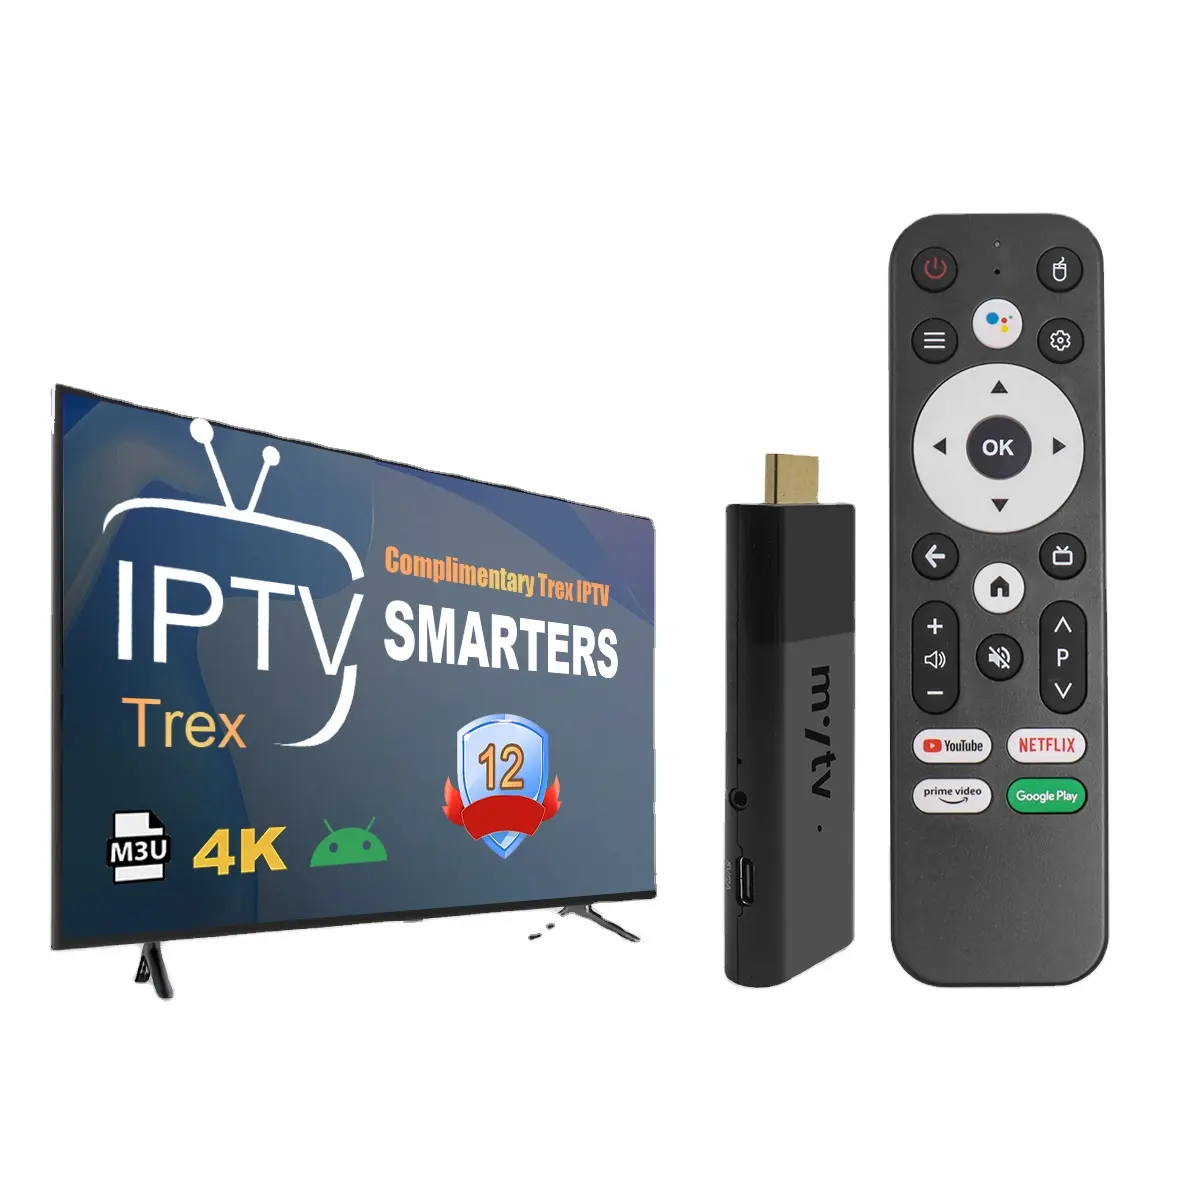 New Android Fire Stick streaming device Dual band WIFI BT with Voice Remote with Trex IPTV 4k Tv Stick